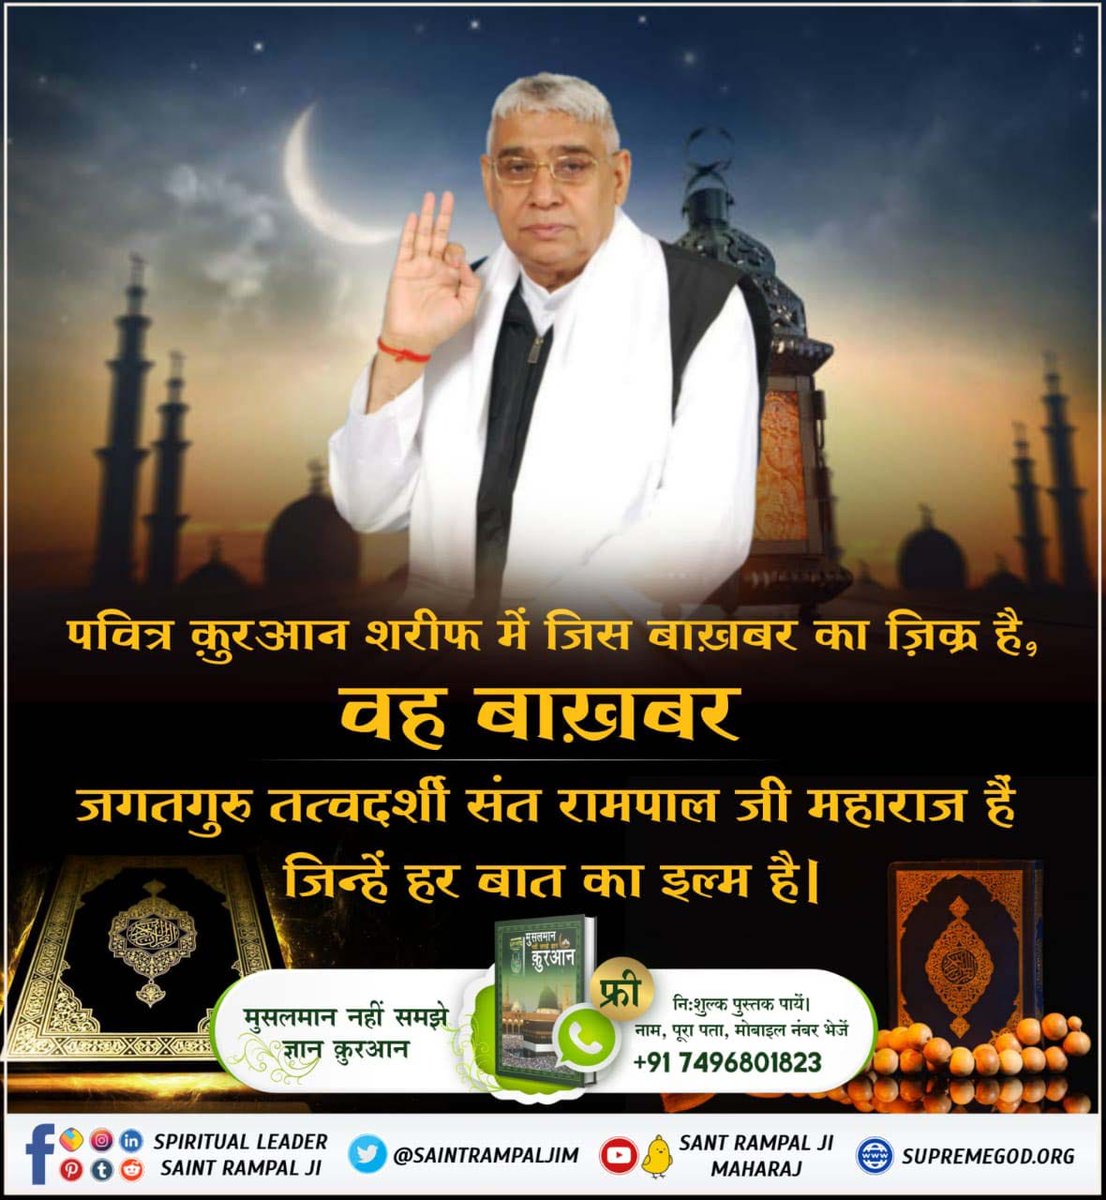 #इस्लाम_की_अनसुलझी_पहेली

Baakhabar Sant Rampal Ji

In the HolyGita,the giver of knowldge of Gita has asked to find a Tatvdrshi Sant to attain God and the giver of knowldge of QuranSharif has asked to find a Bakhbar to attain Allah.That is none other than Saint Rampal Ji Maharaj.